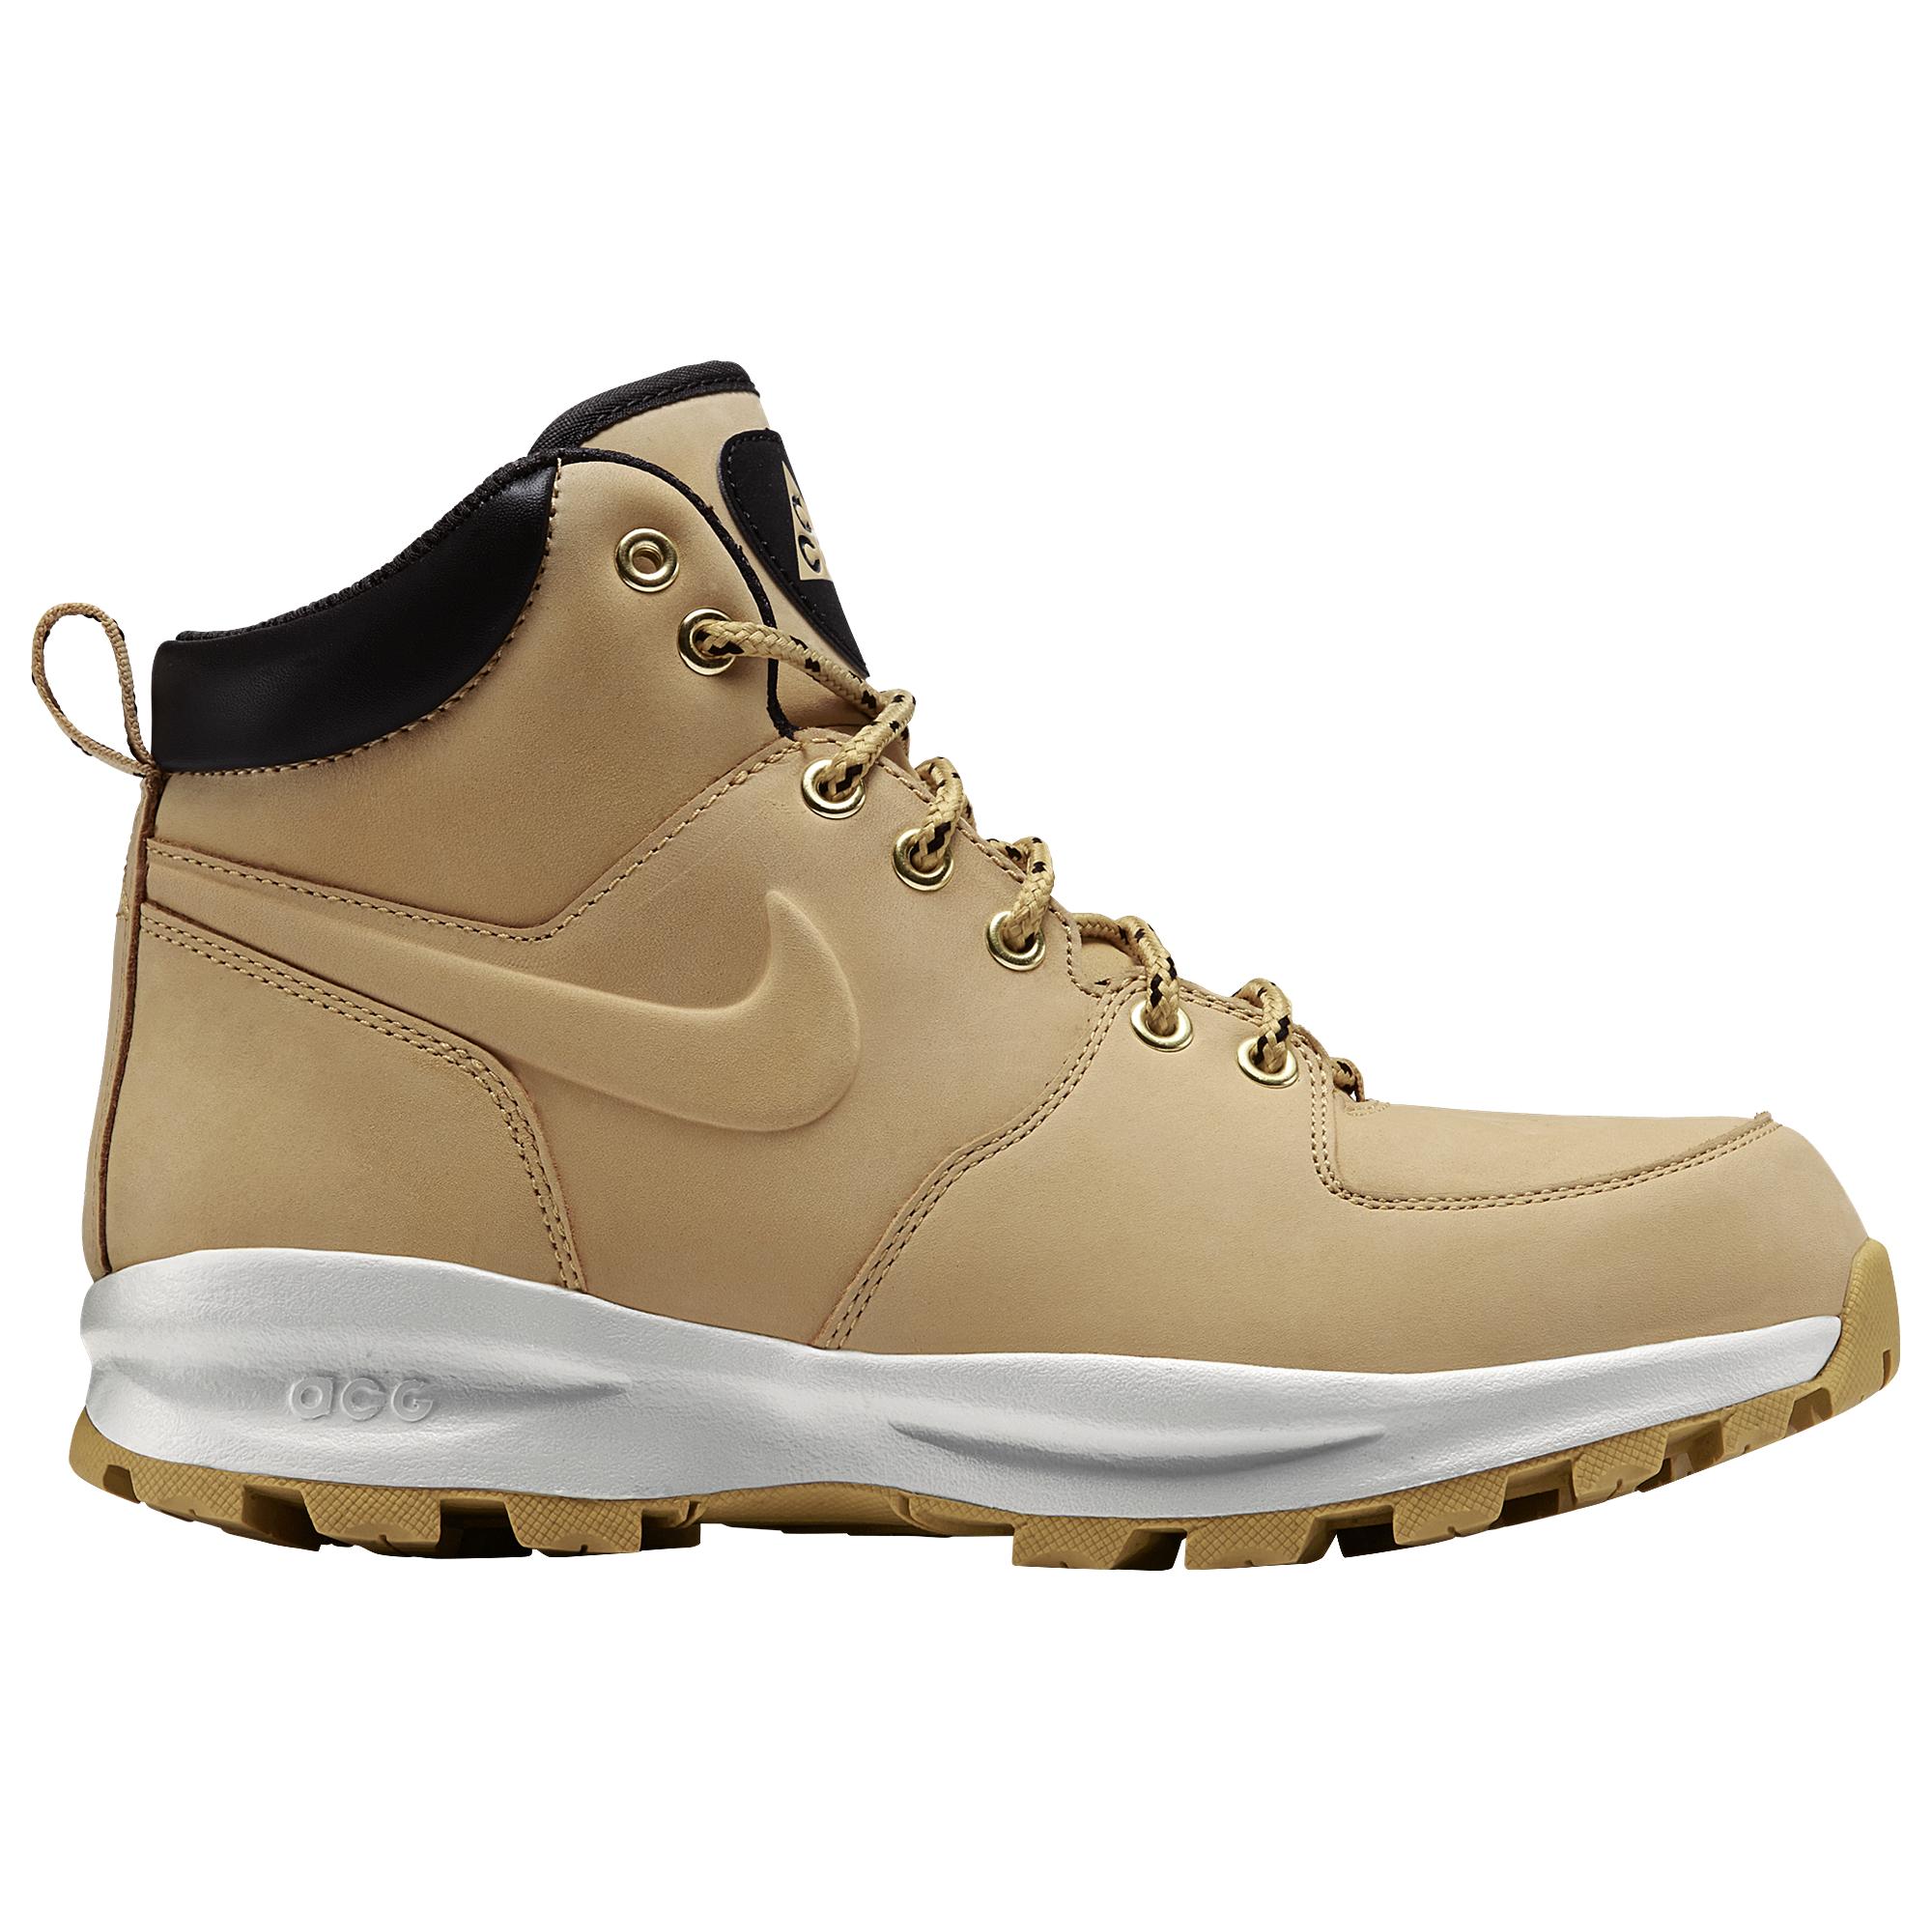 Nike Leather Manoa Sneaker Boots in Brown for Men - Lyst